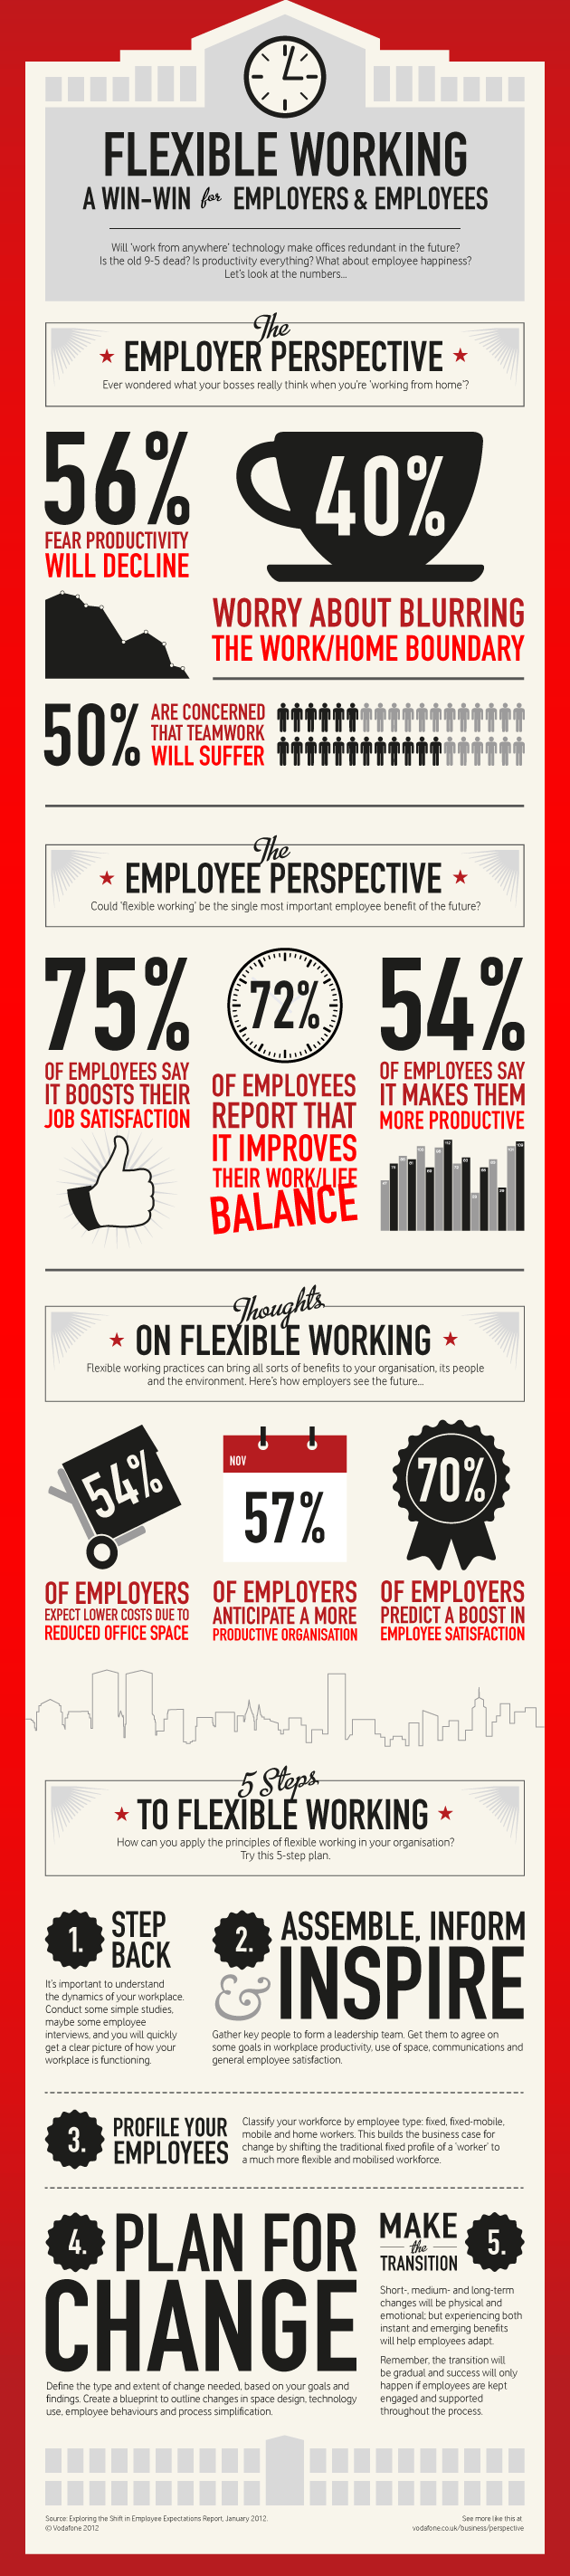 flexible working win-win for employees and employers infographic